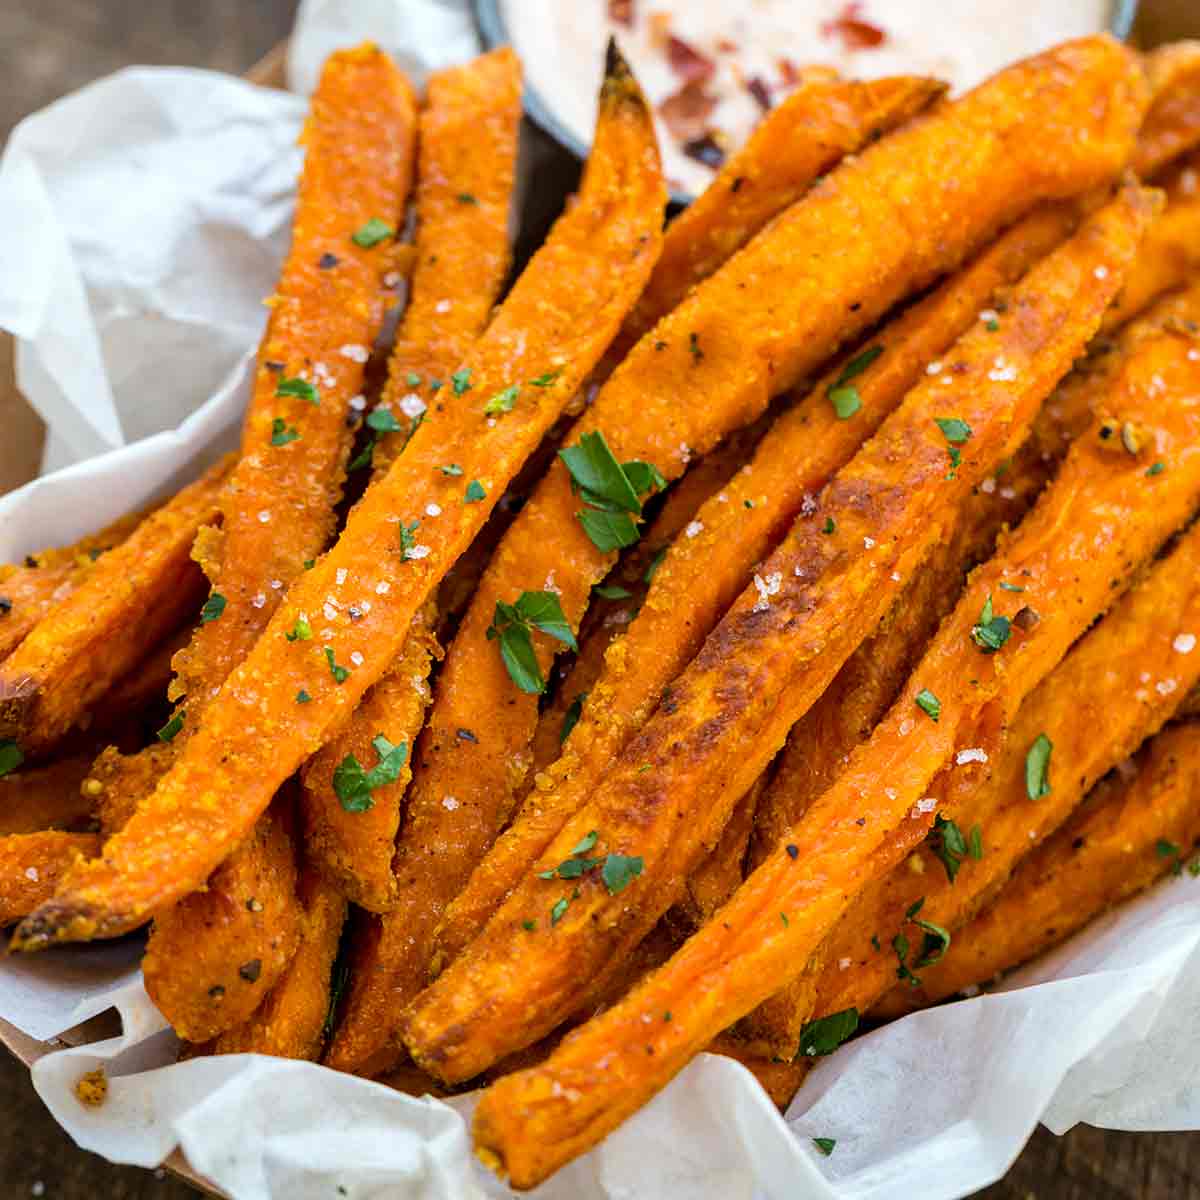 Baked spicy sweet potato fries 399 cal per serving